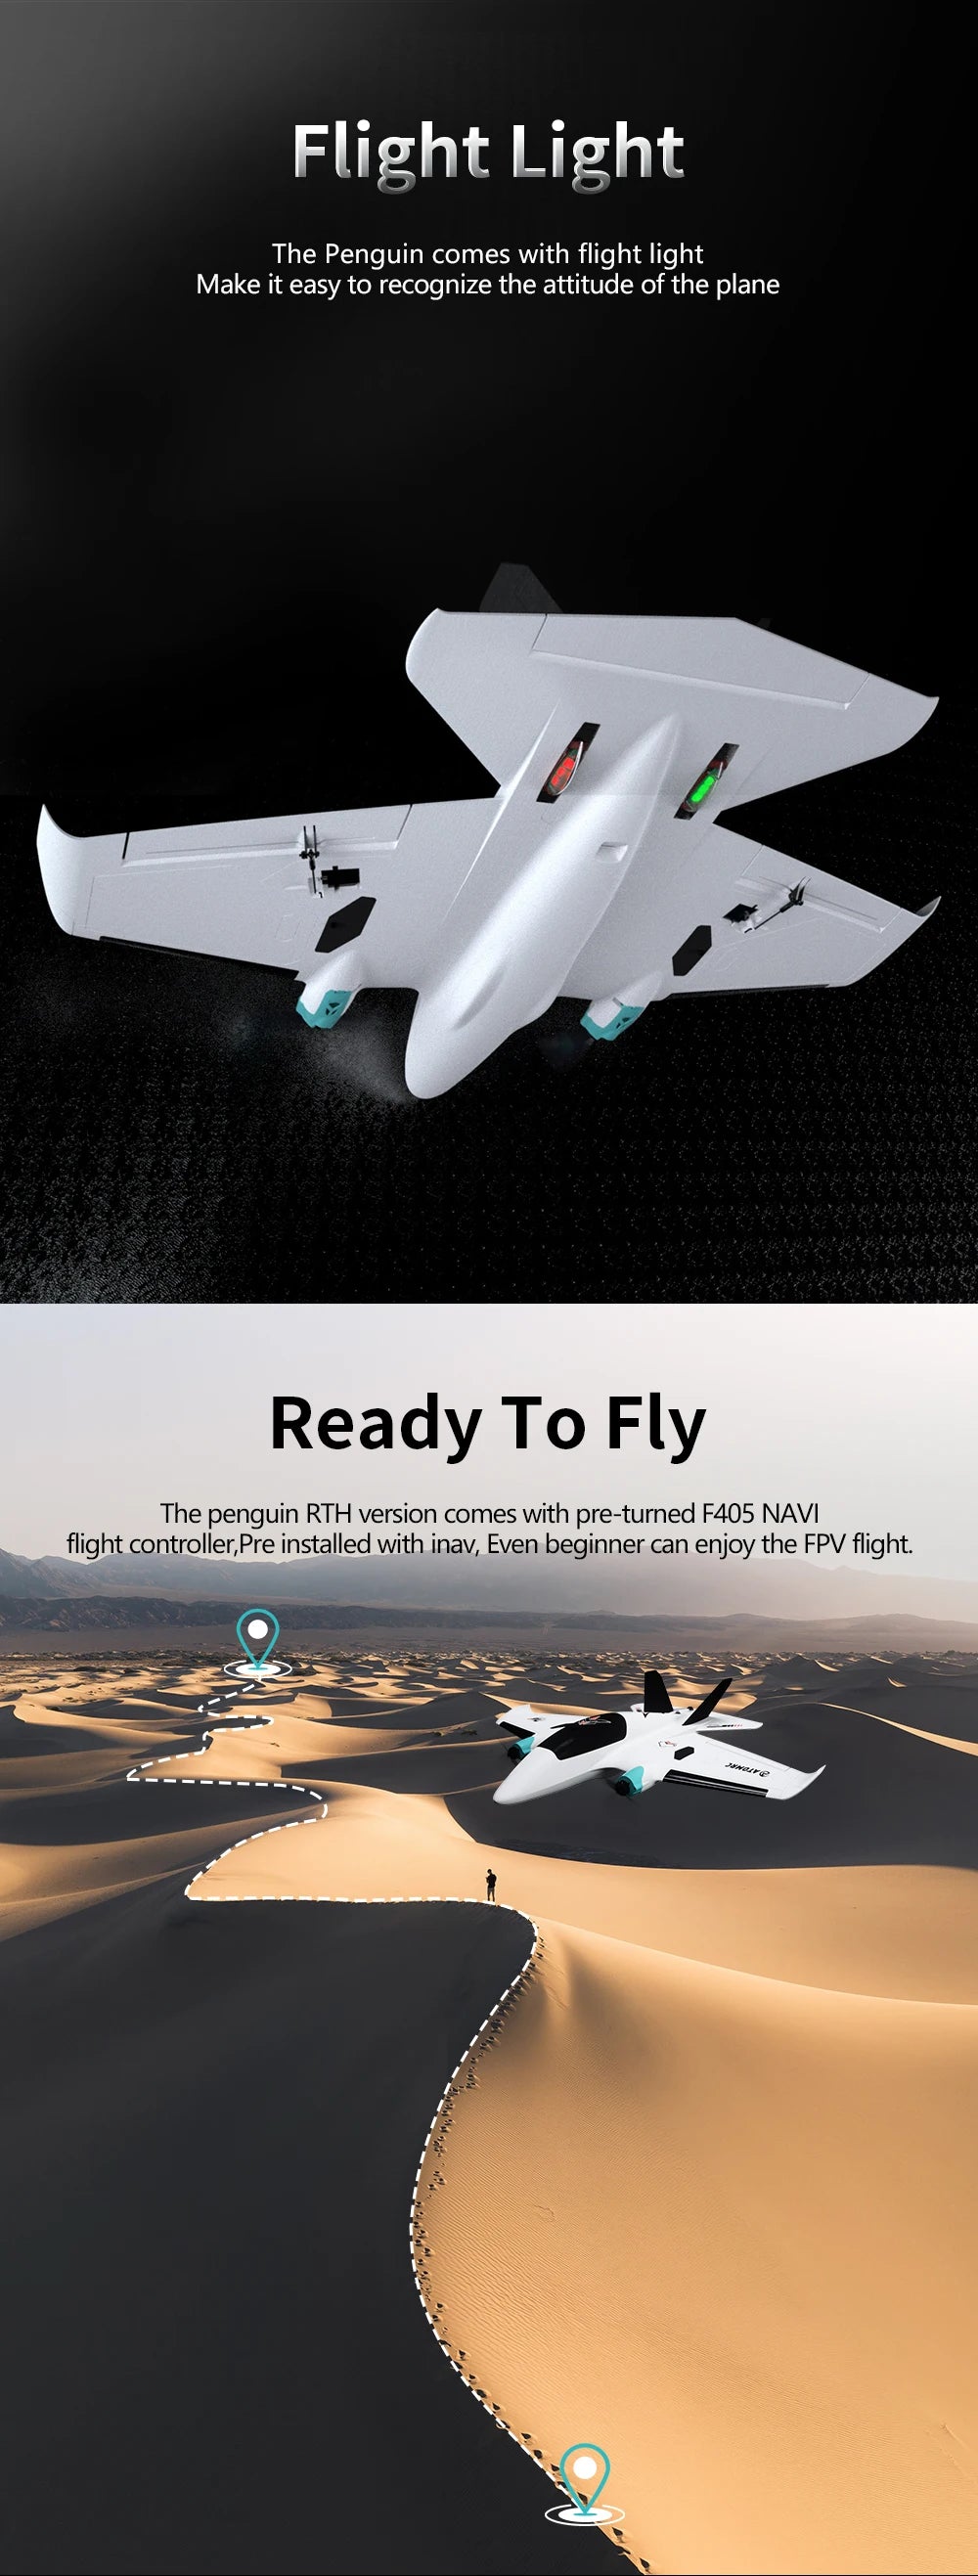 ATOMRC Penguin, penguin RTH version comes with flight light Make it easy to recognize the attitude of the plane